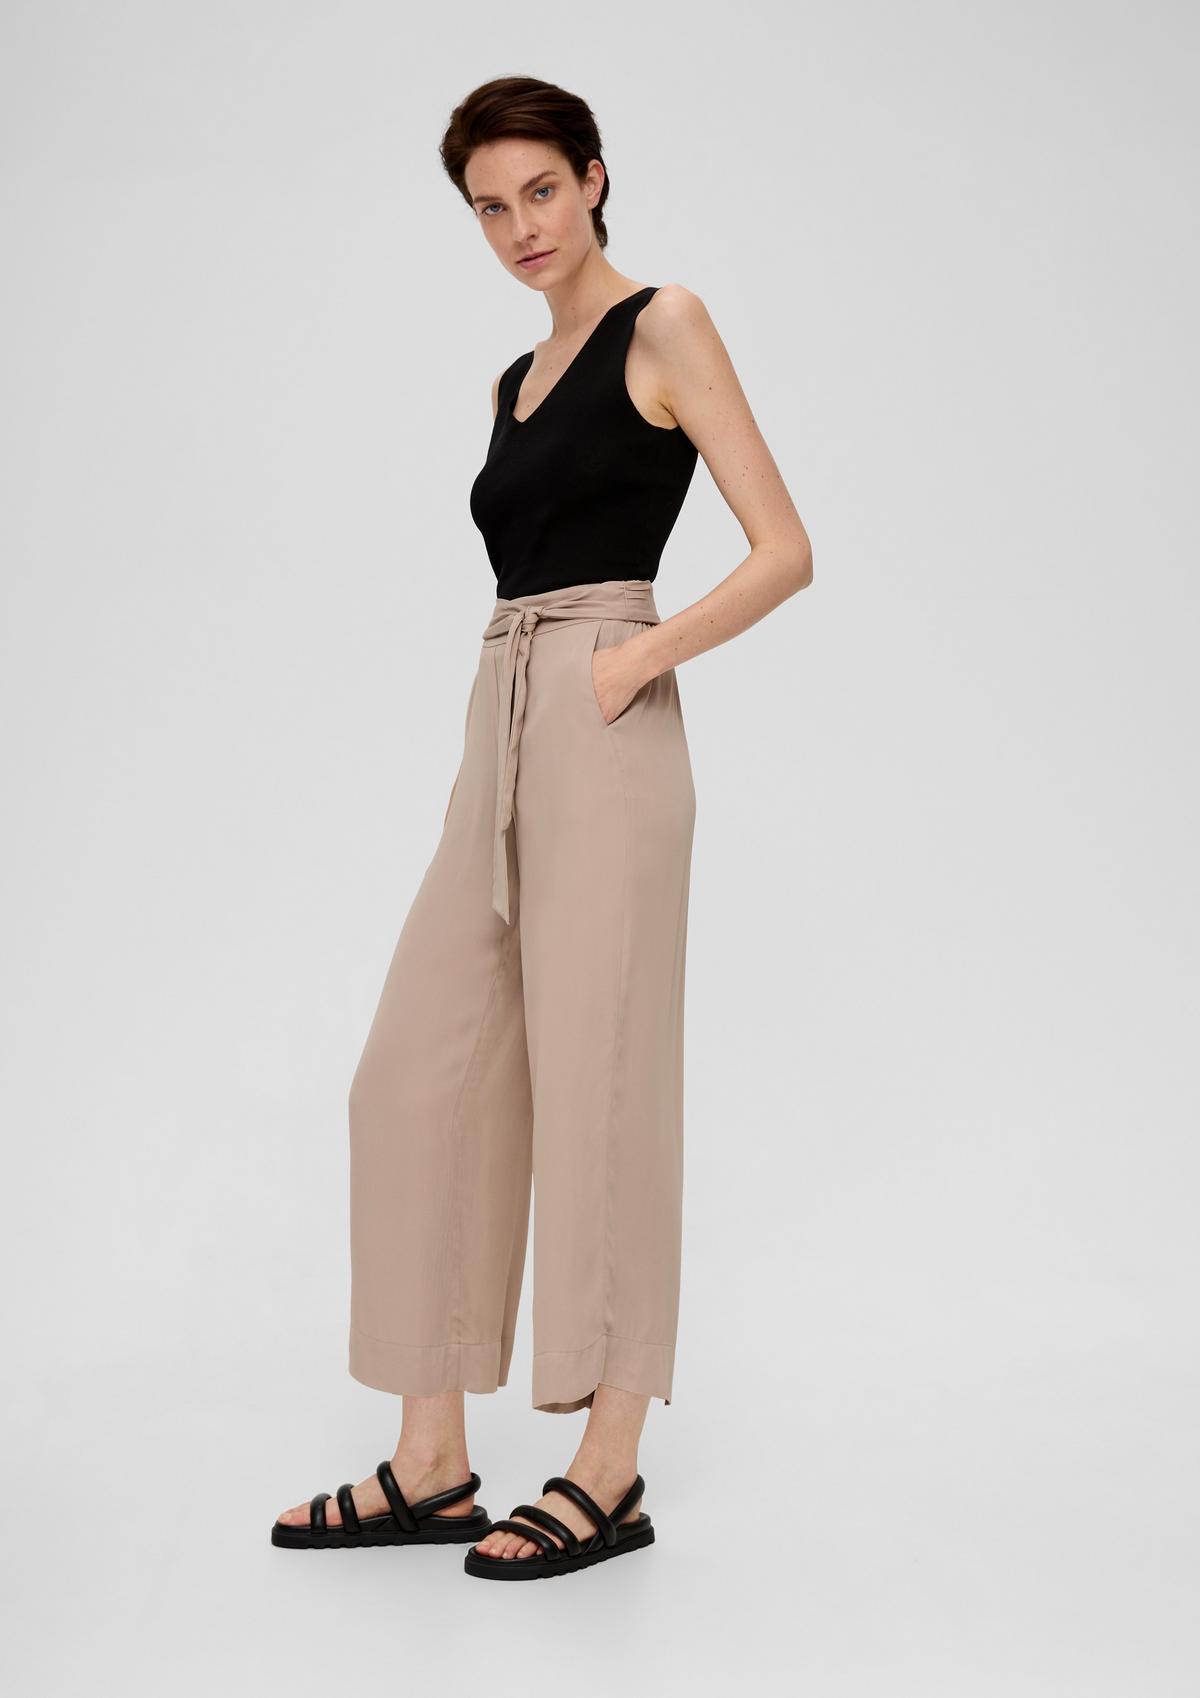 Culottes: Order now in shop online the